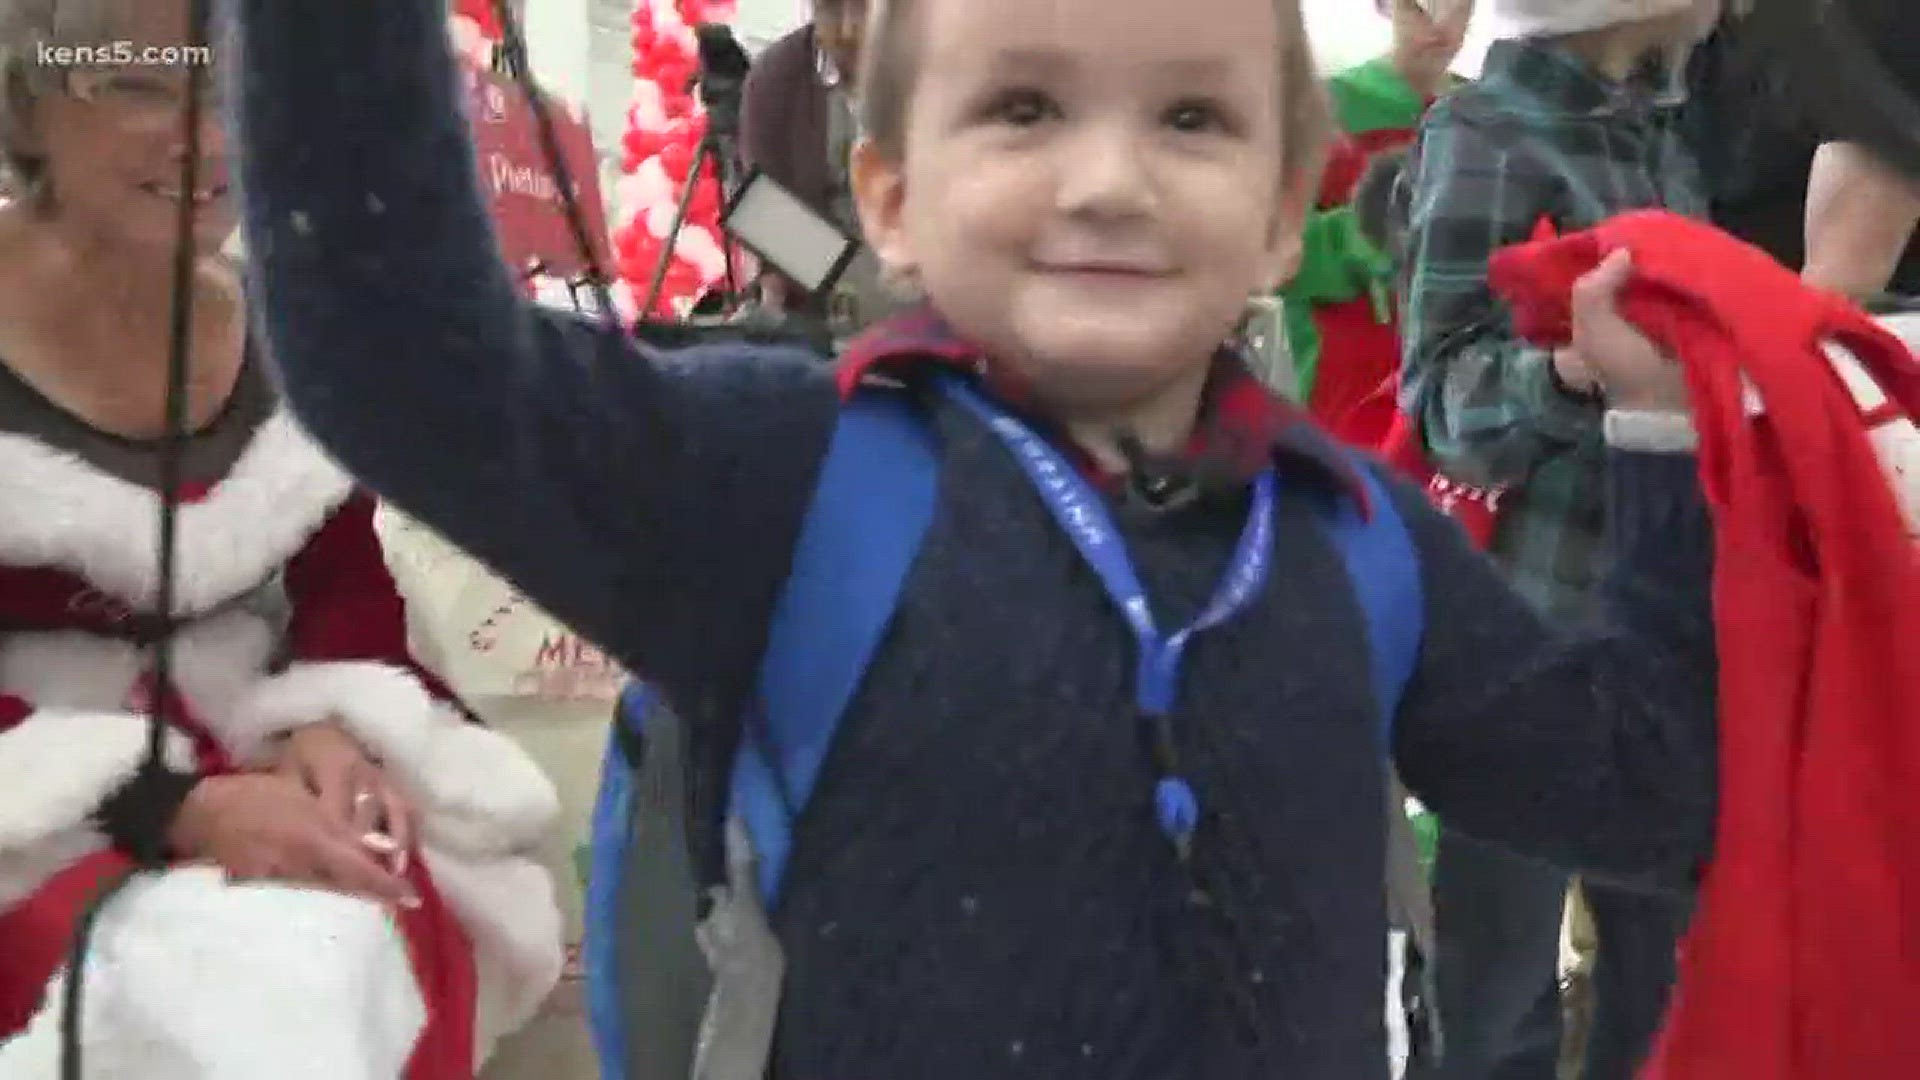 Fantasy flight to 'North Pole' brings cheer to kids in hospital